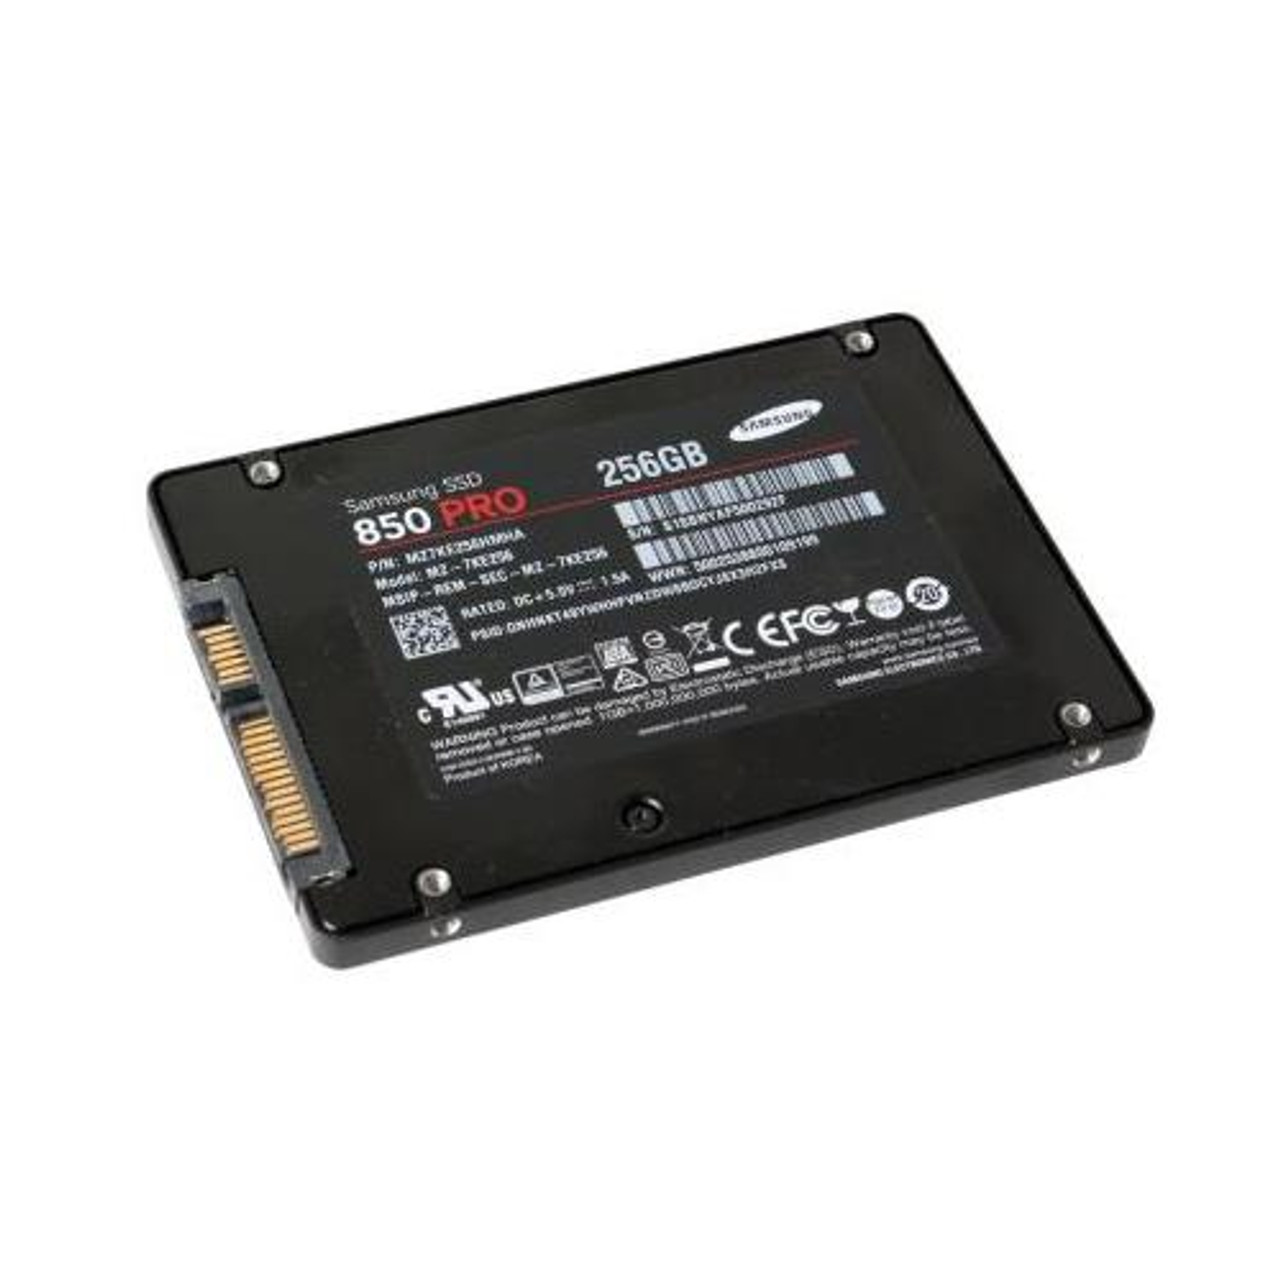 Samsung SATA 6.0 Gbps 256GB Solid State Drive